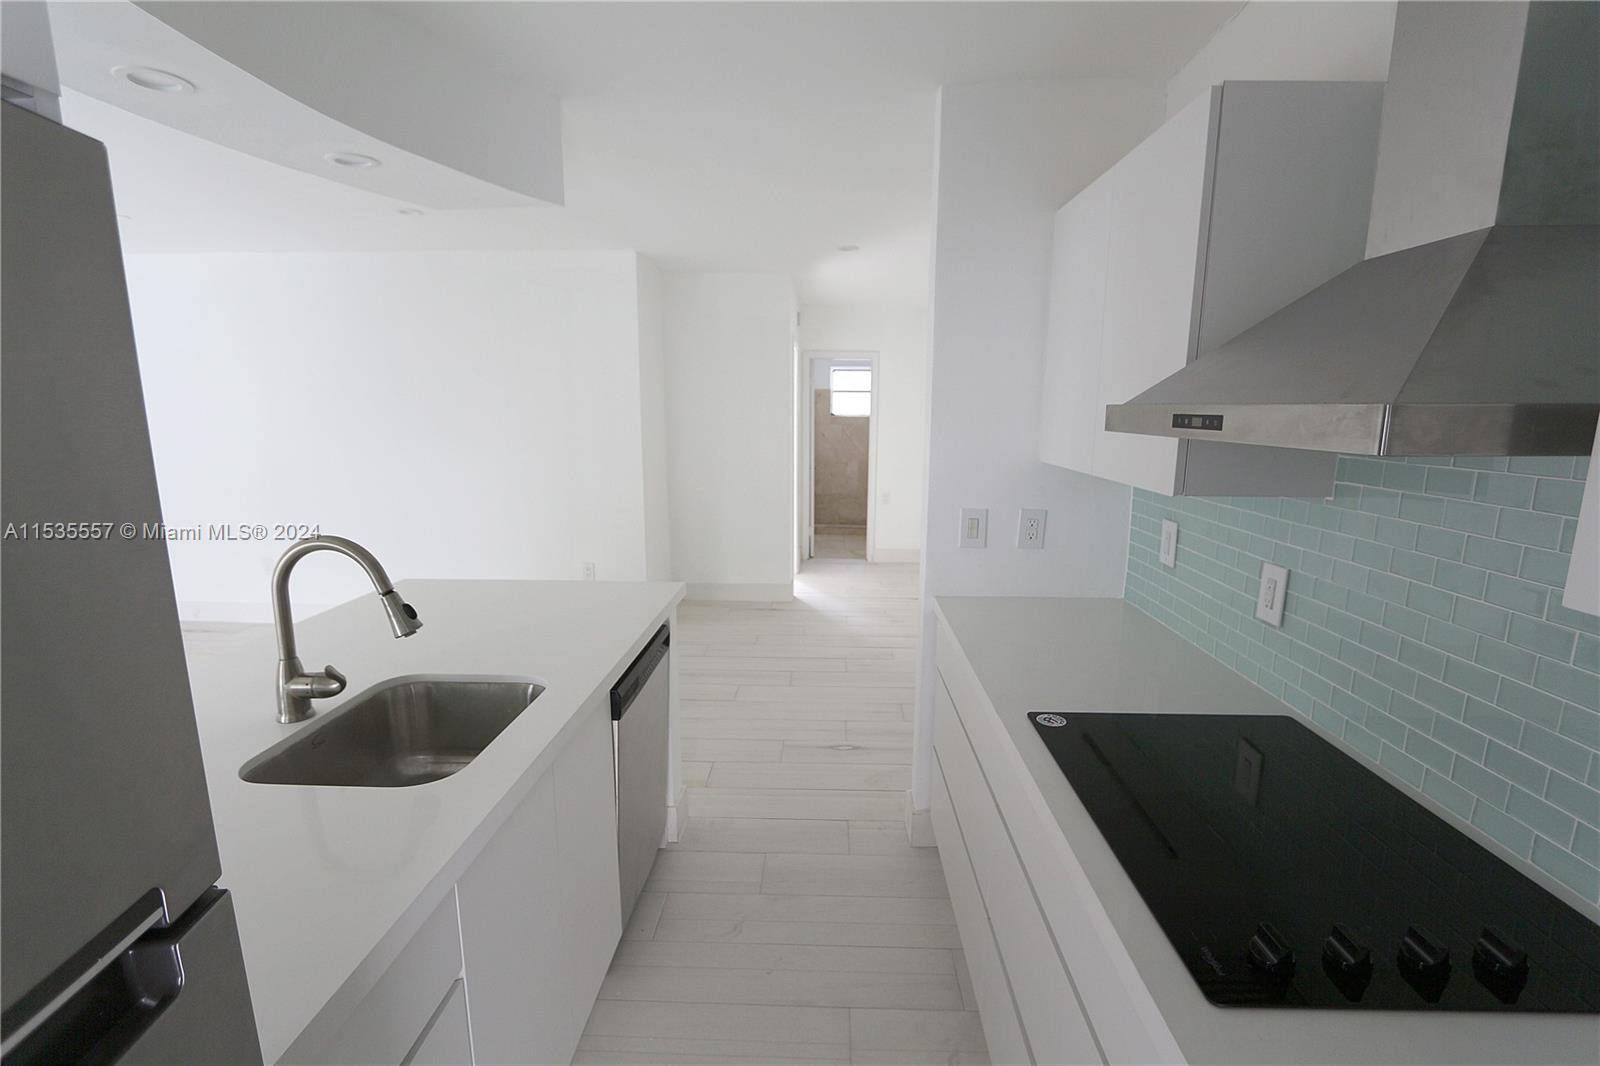 Indulge in the epitome of South Beach living with this meticulously renovated 1 bedroom, 1 bathroom gem.